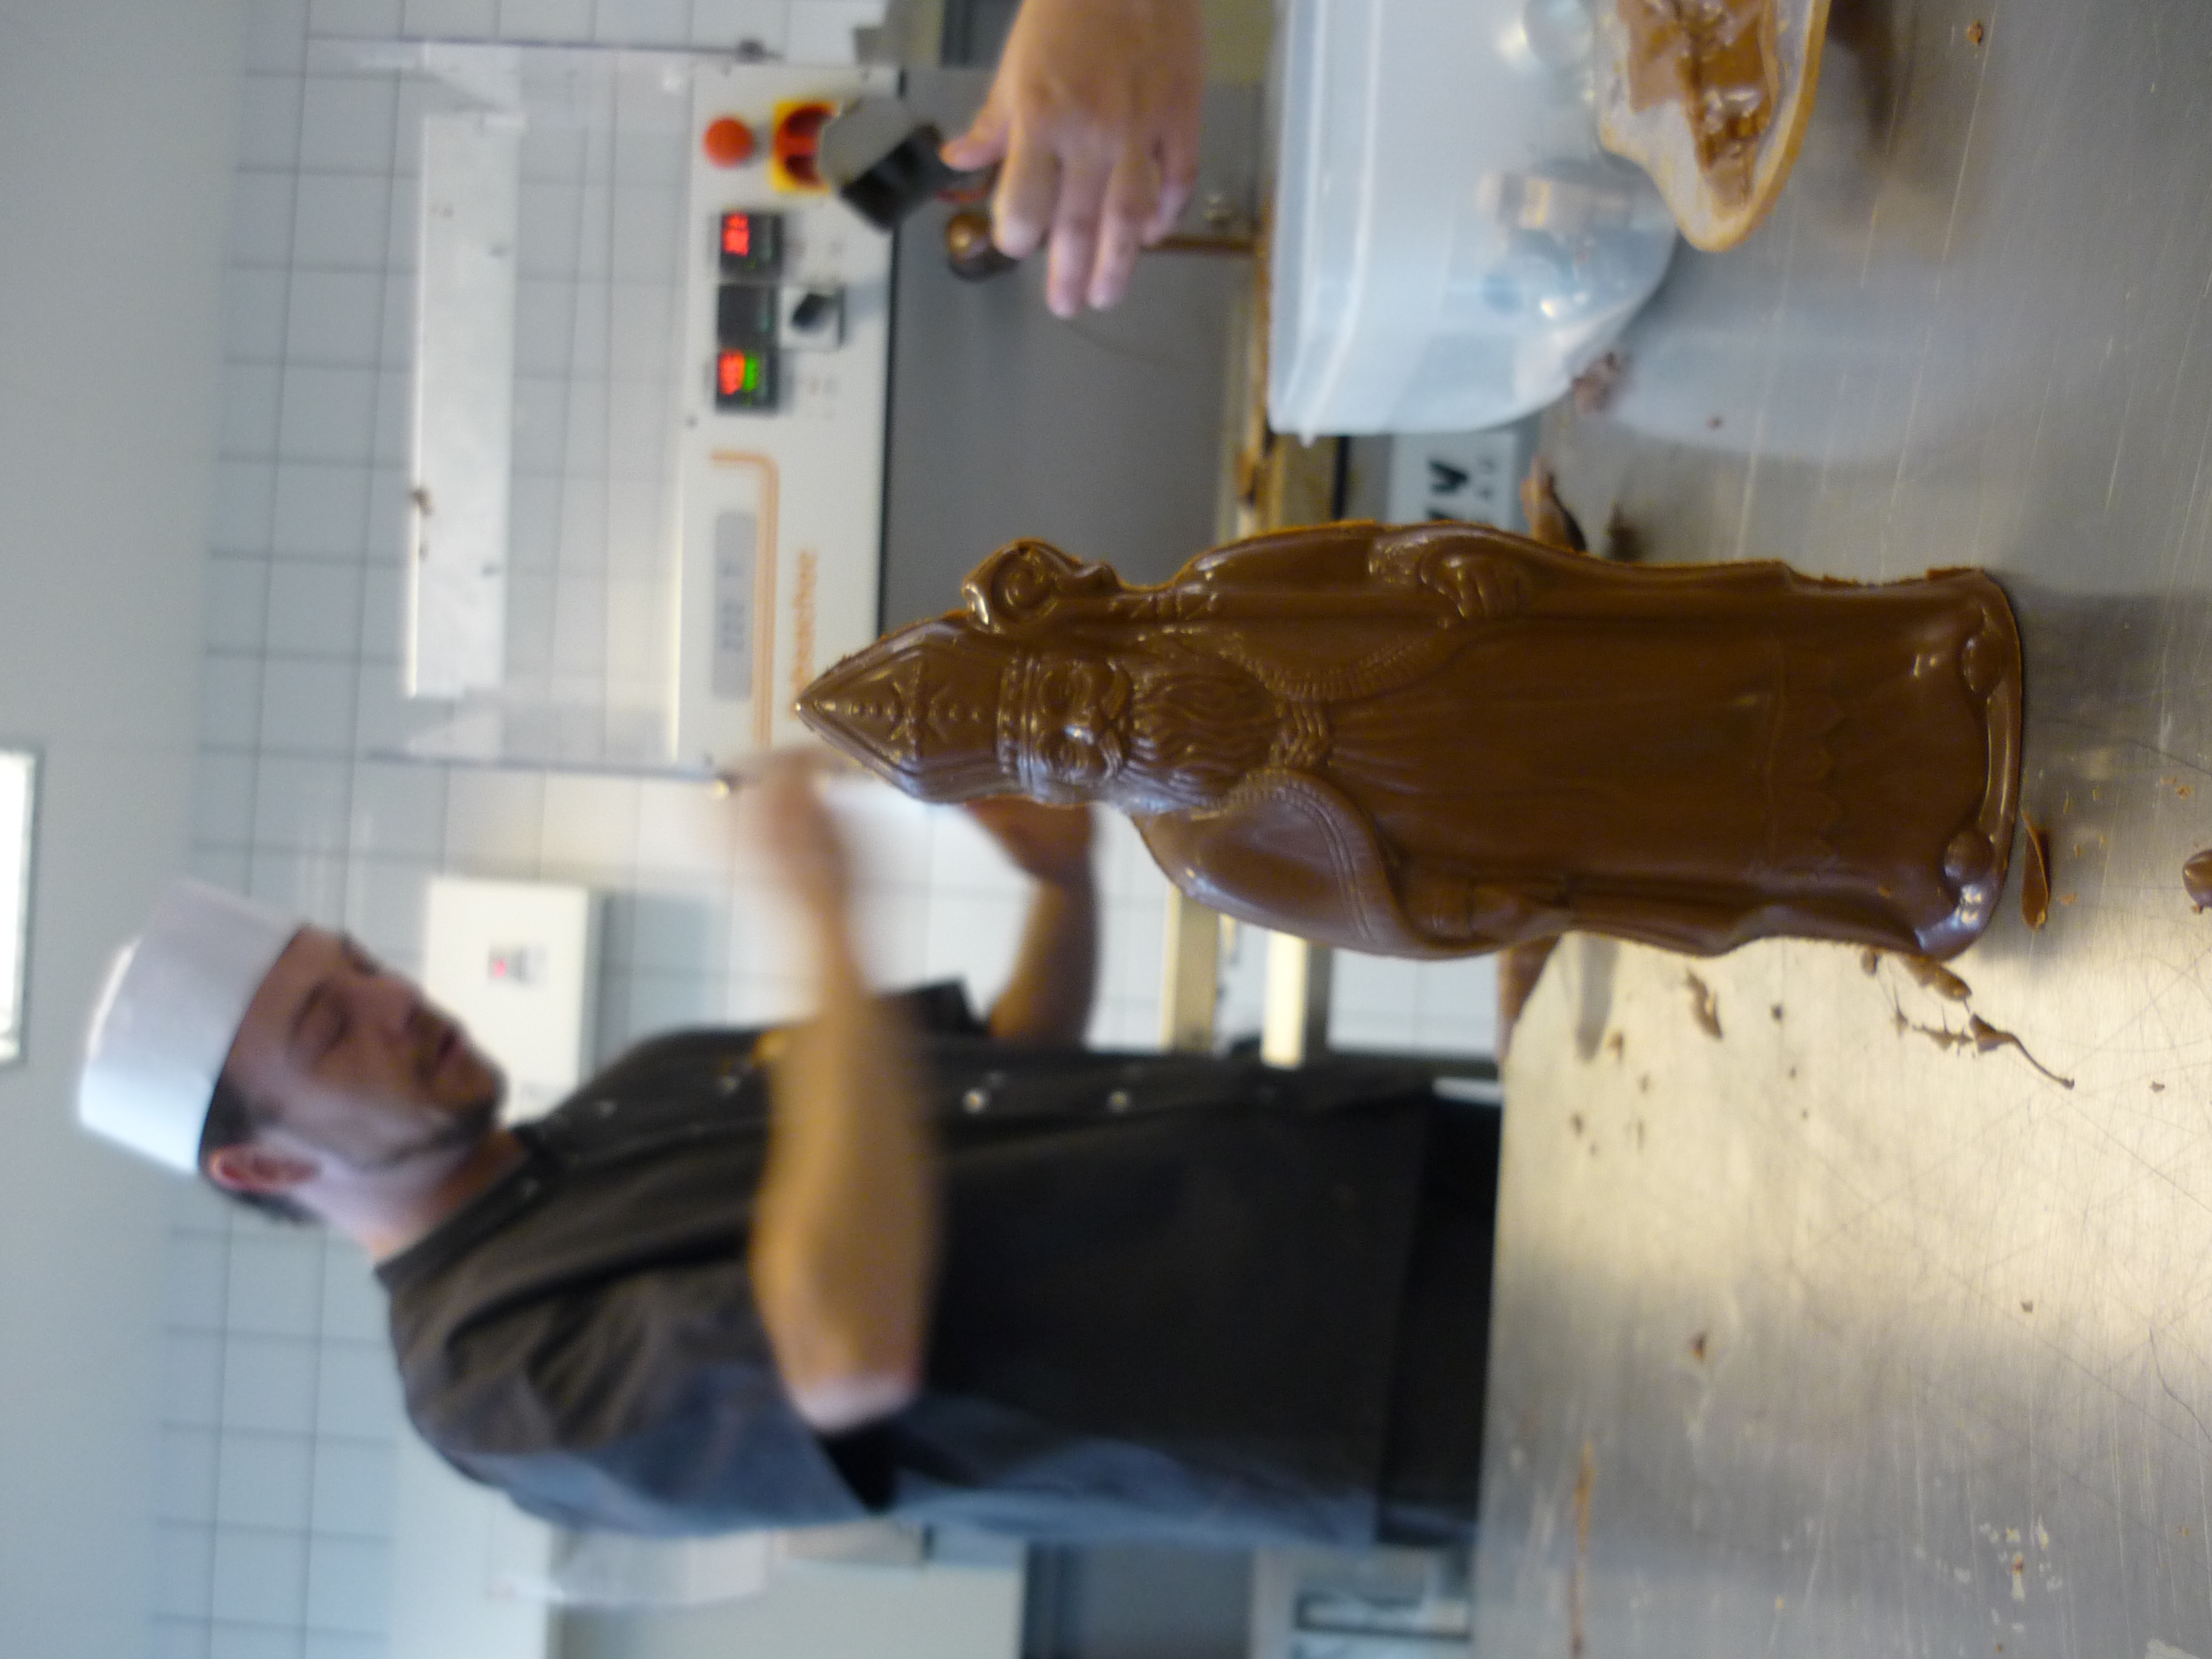  The&nbsp;Maître Chocolatier explains us their work process and ingredients 